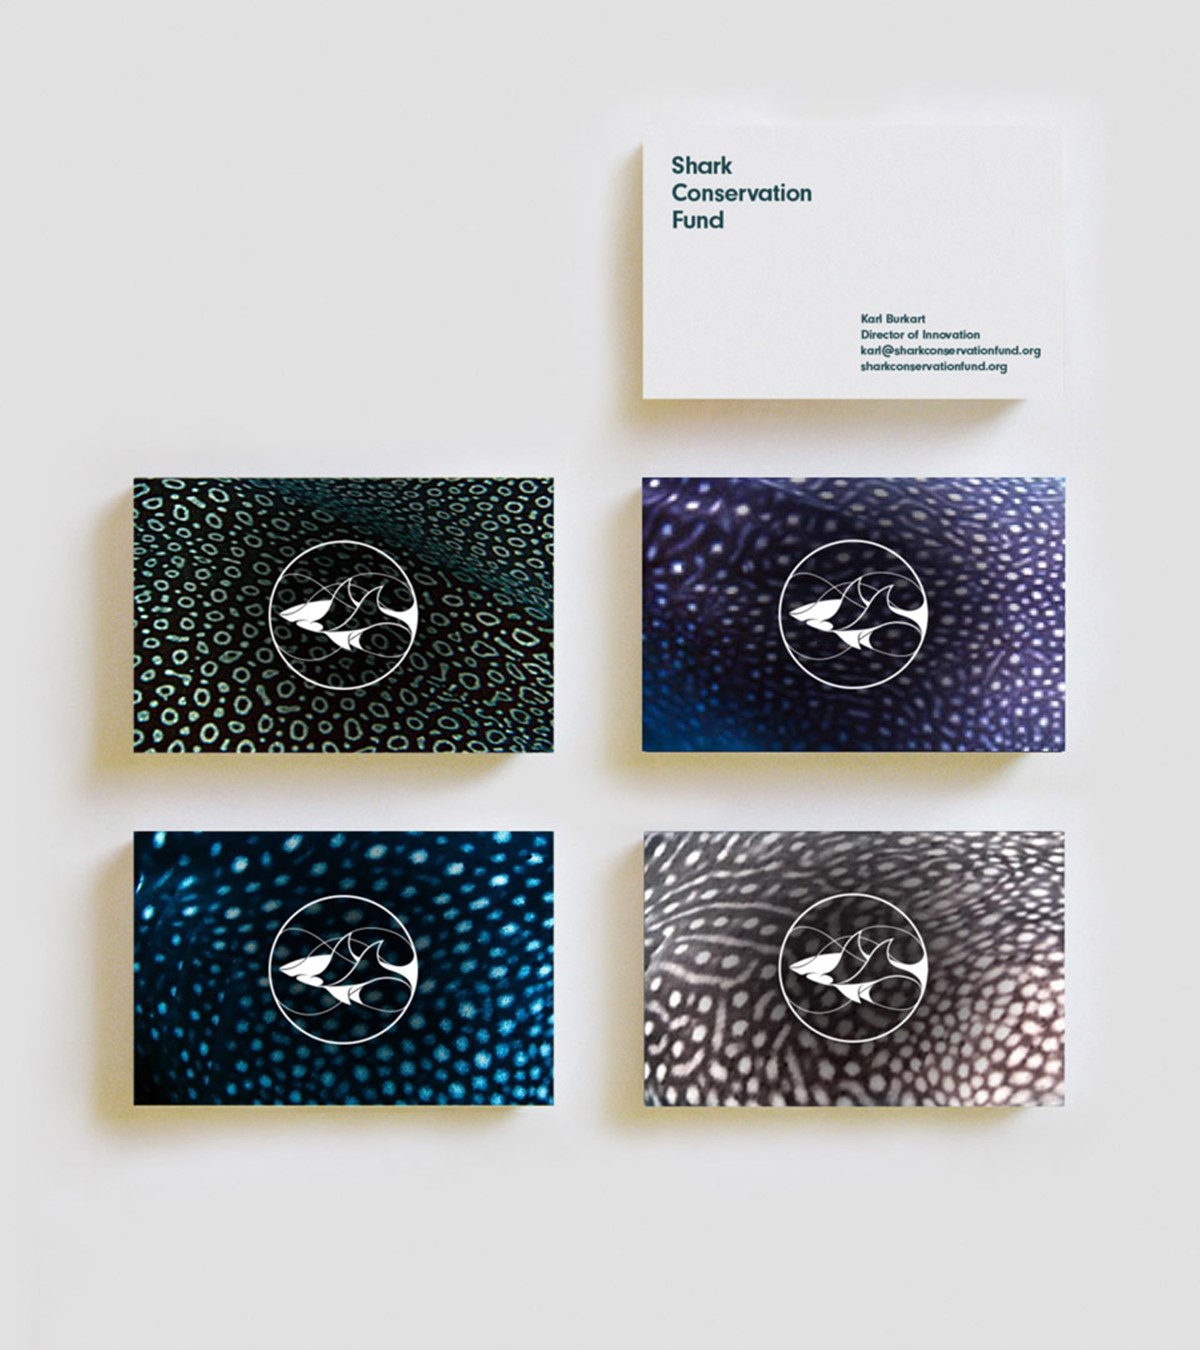 Shark Conservation Fund business cards. Client: DiCaprio Foundation.